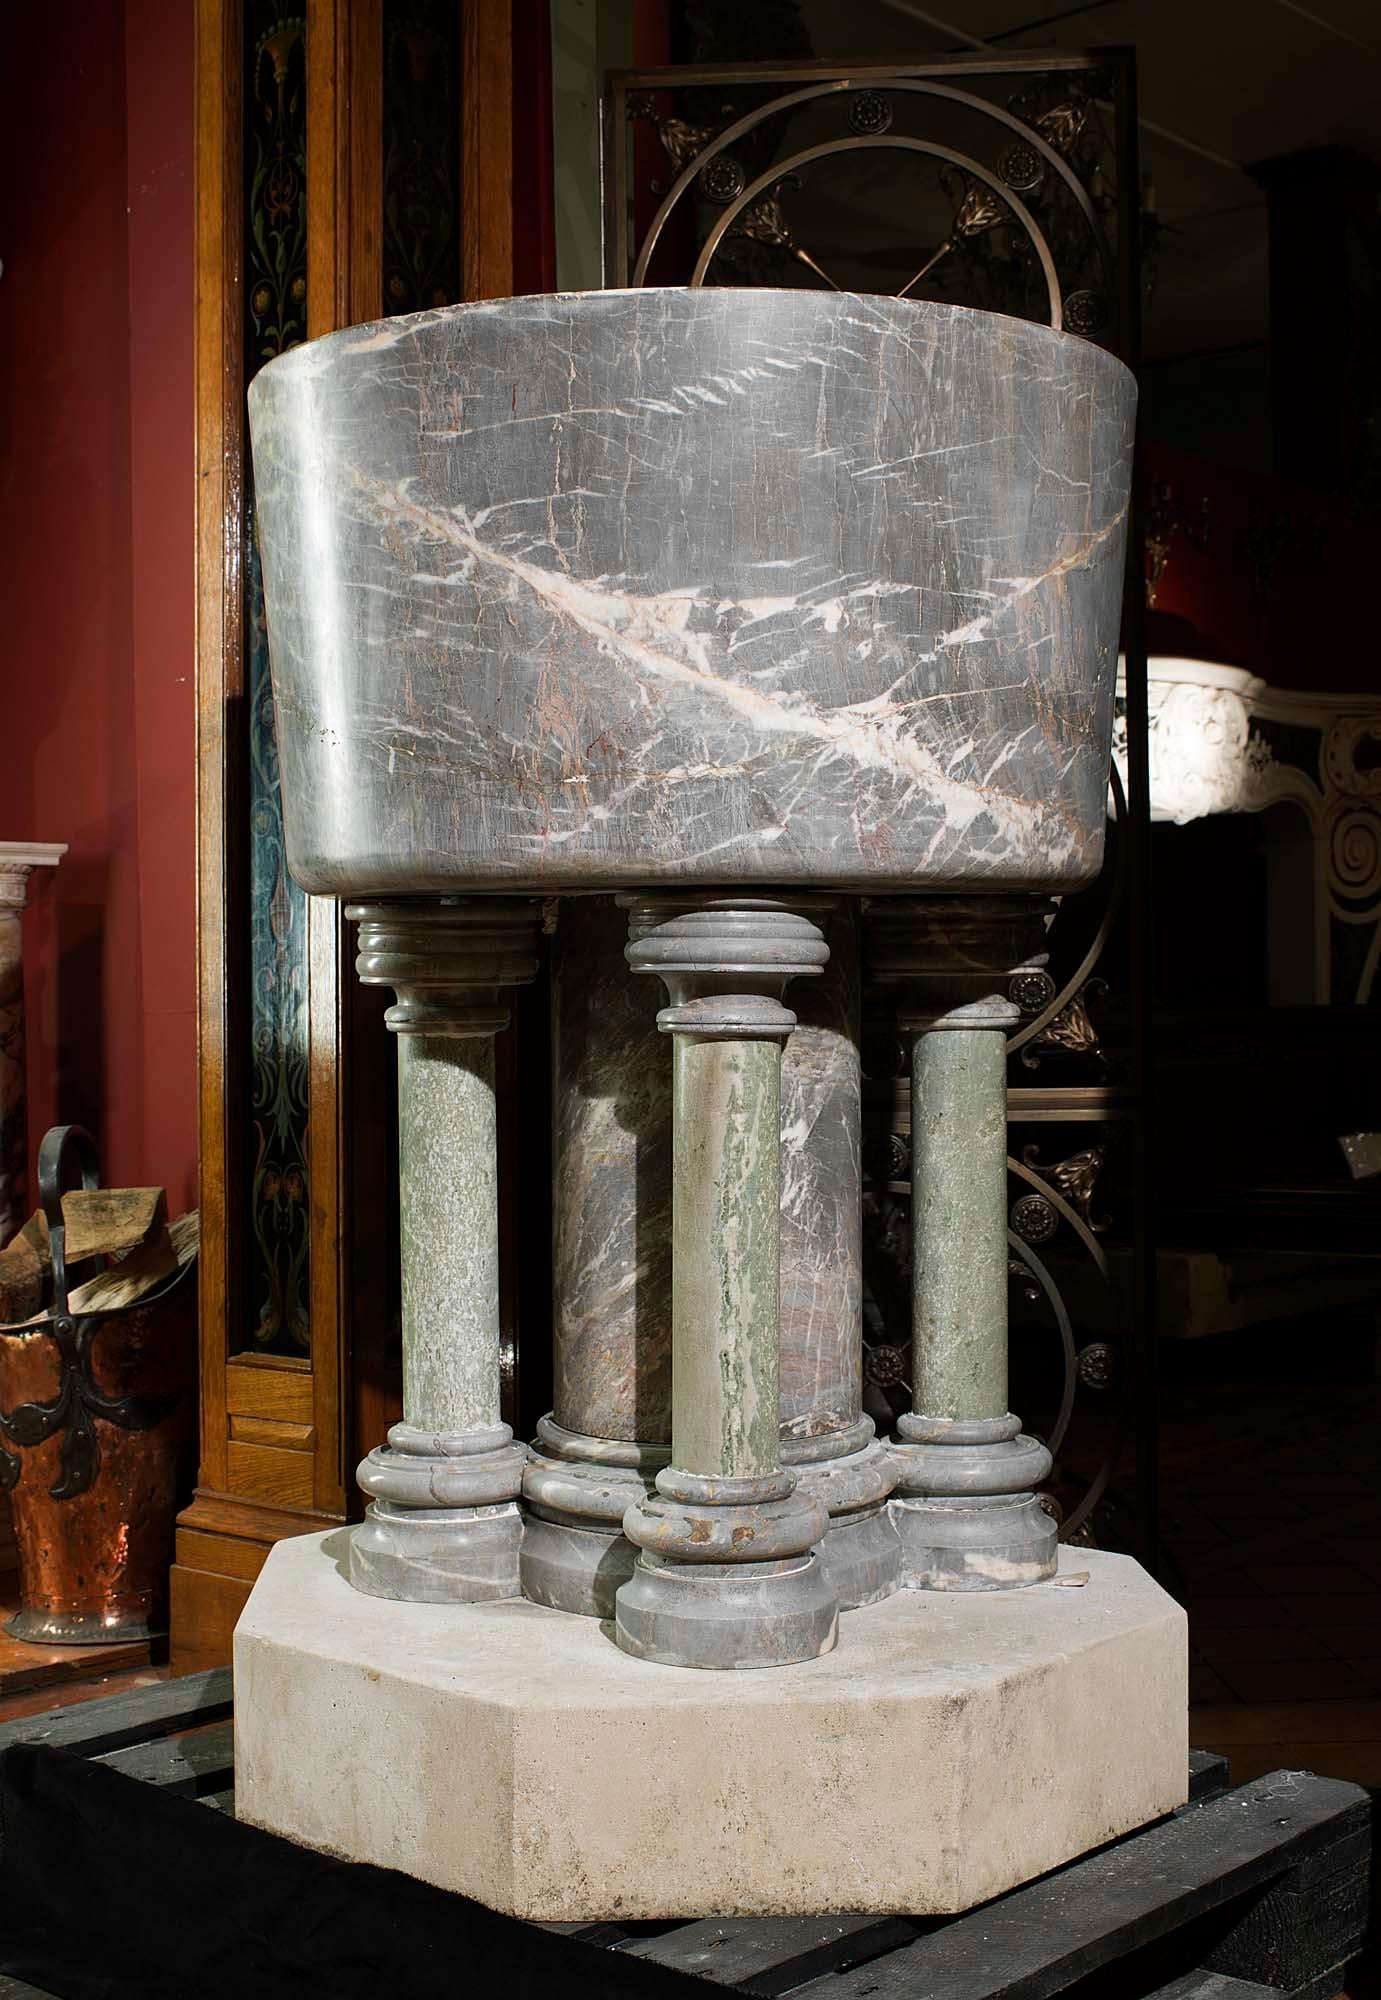 An impressive and large baptismal font entirely carved from Ashburton Marble. This is a soft grey and blush pink, lightly veined marble with evidence of fossil remains of creatures, principally corals, crinoids and brachiopods, that lived in the